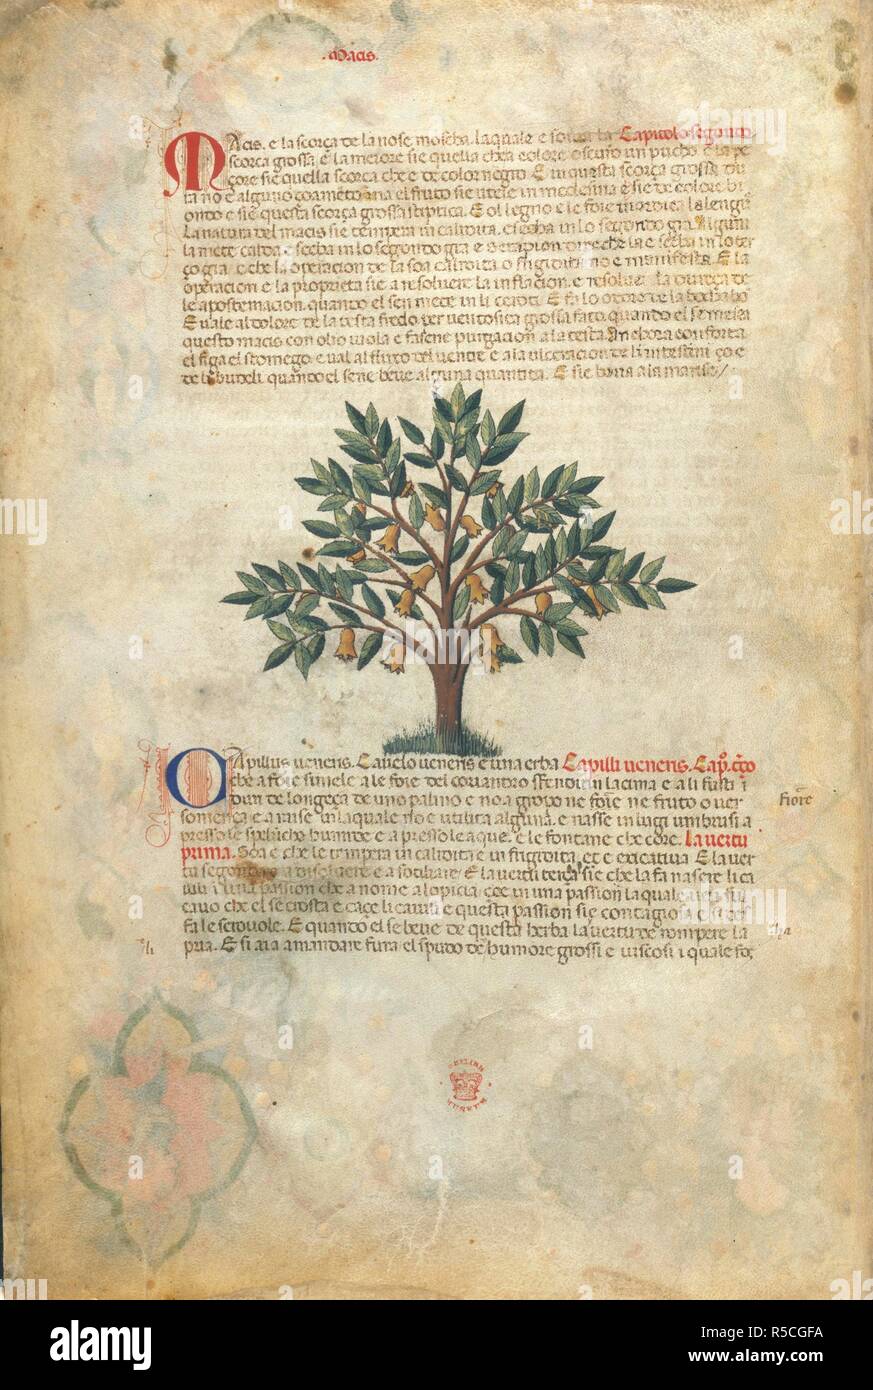 A tree. Serapione Herbario Volgare: an Italian version of the Treatise on  Medical Botany, together with a description of medicines derived from  animals. 14th century. Image taken from Serapione Herbario Volgare: an